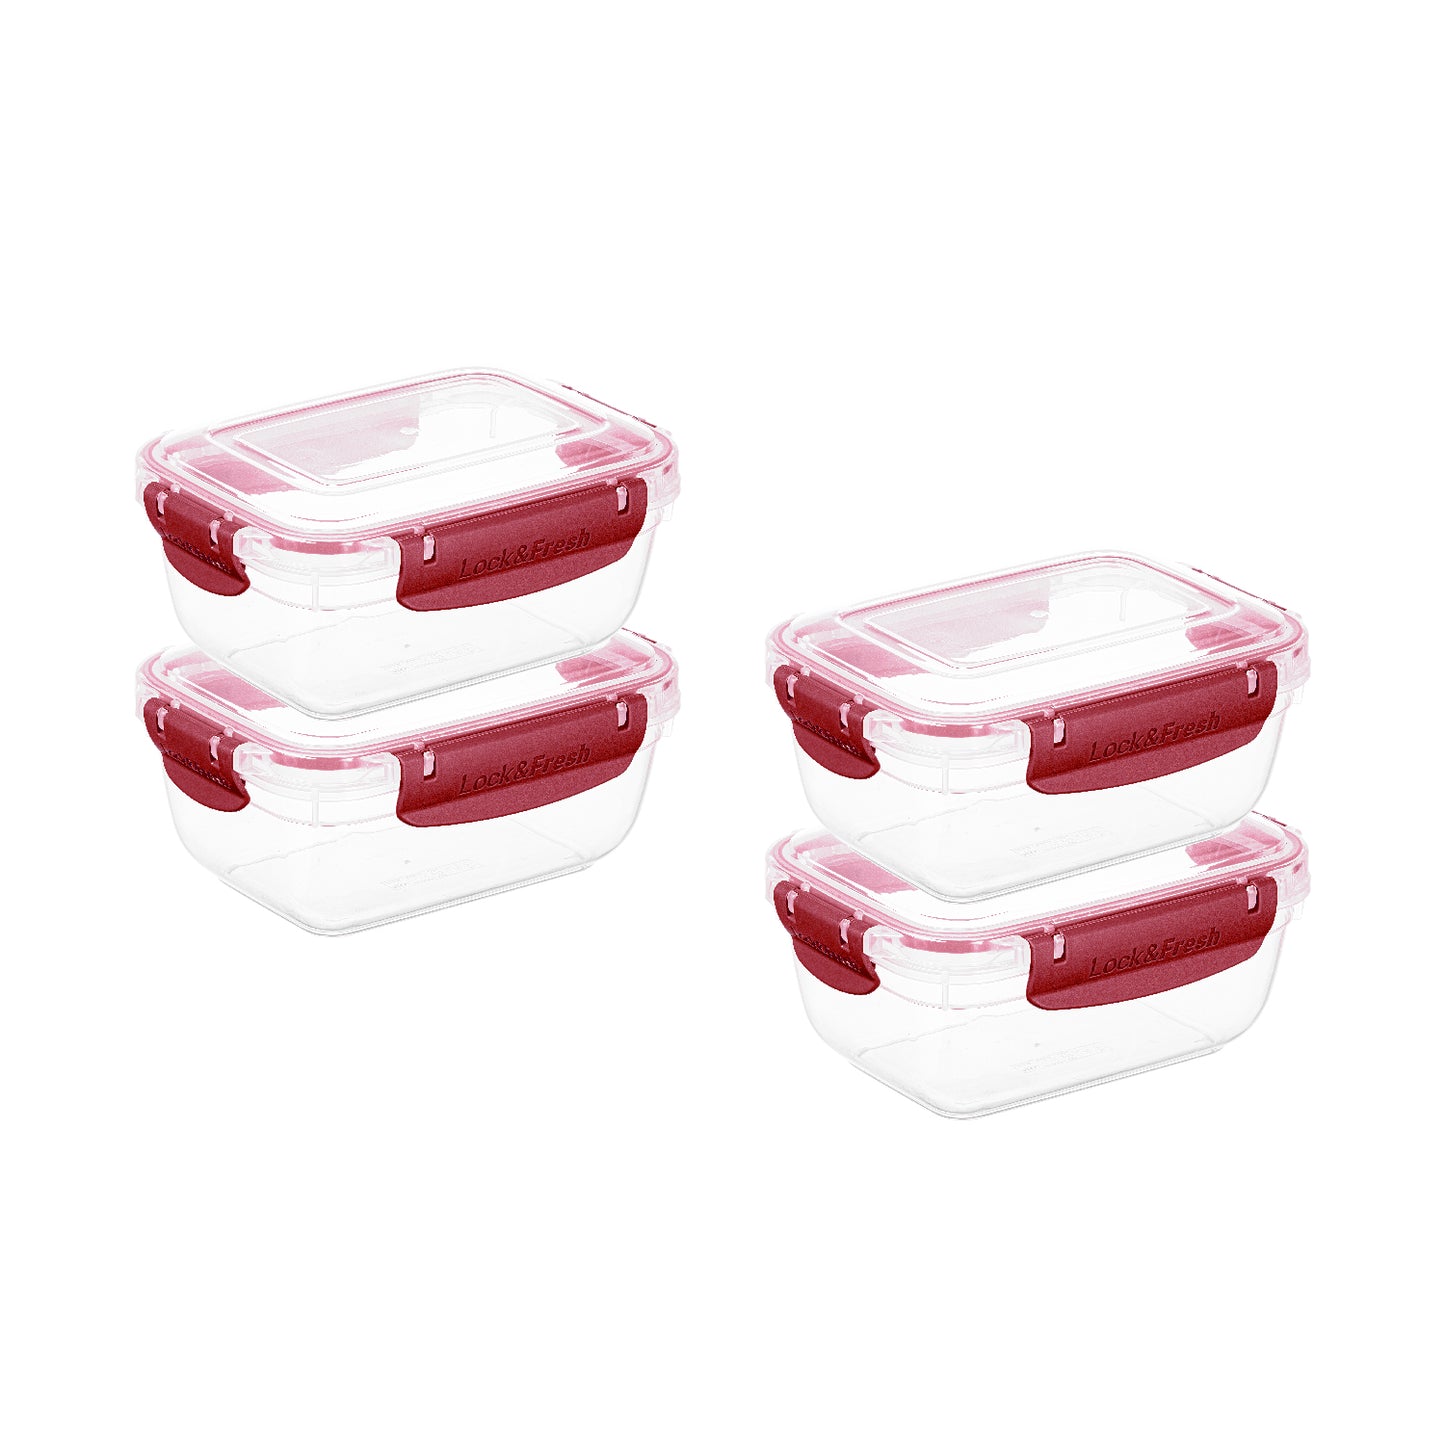 27 oz. Sealed Container, 4 Pack